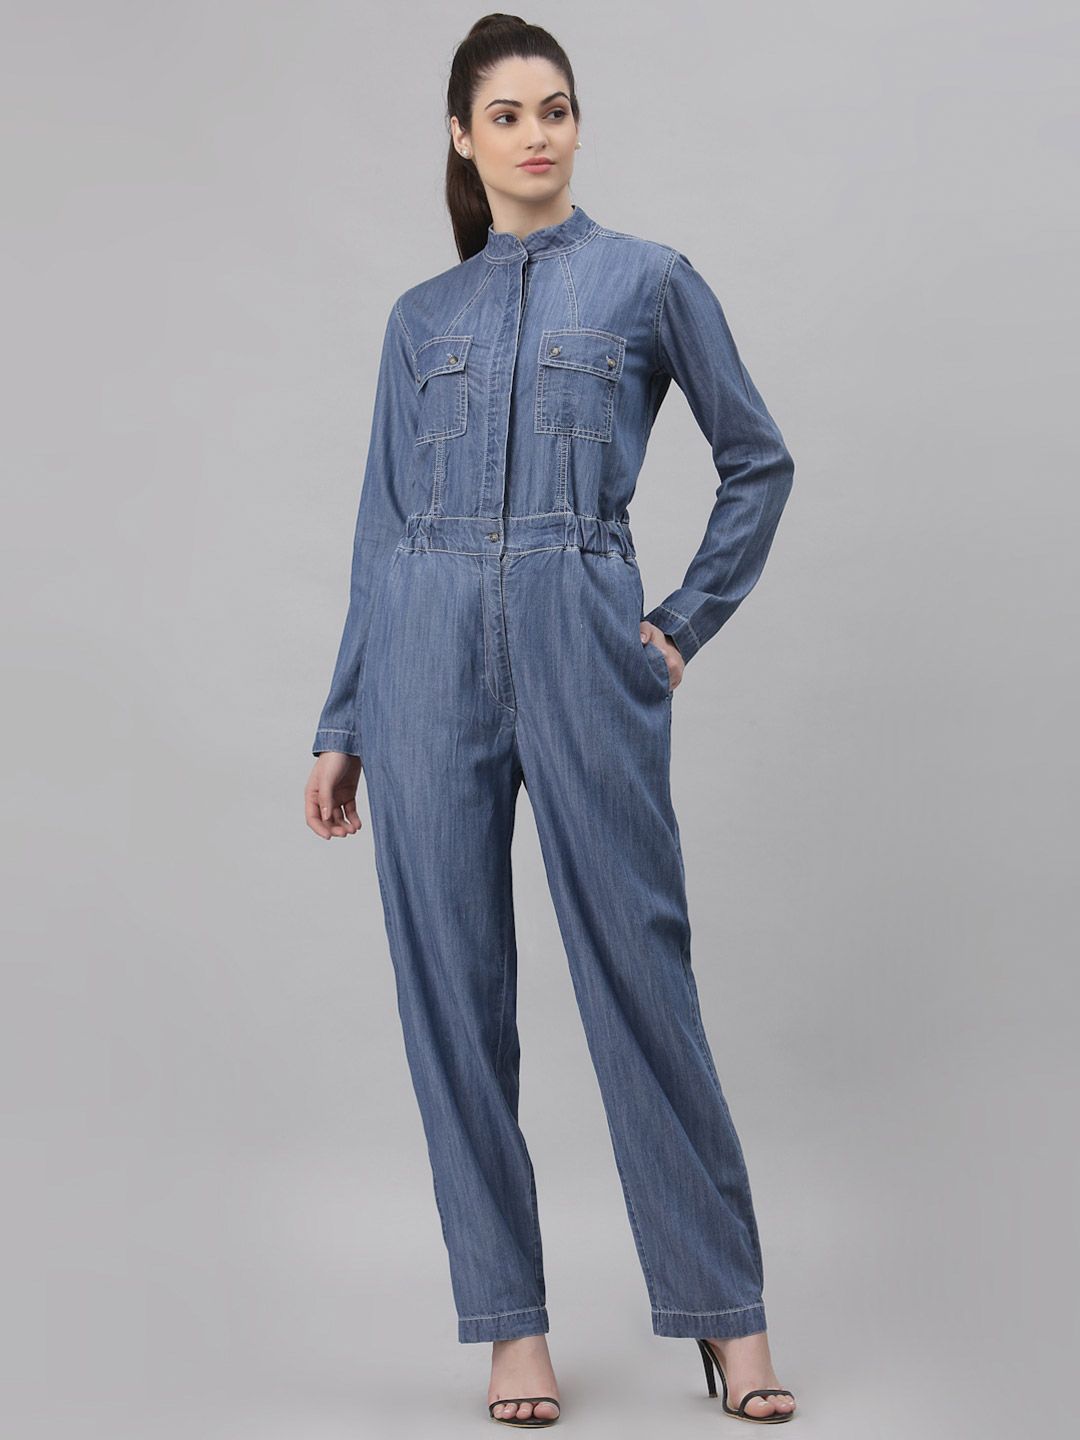 KASSUALLY Blue Basic Jumpsuit Price in India